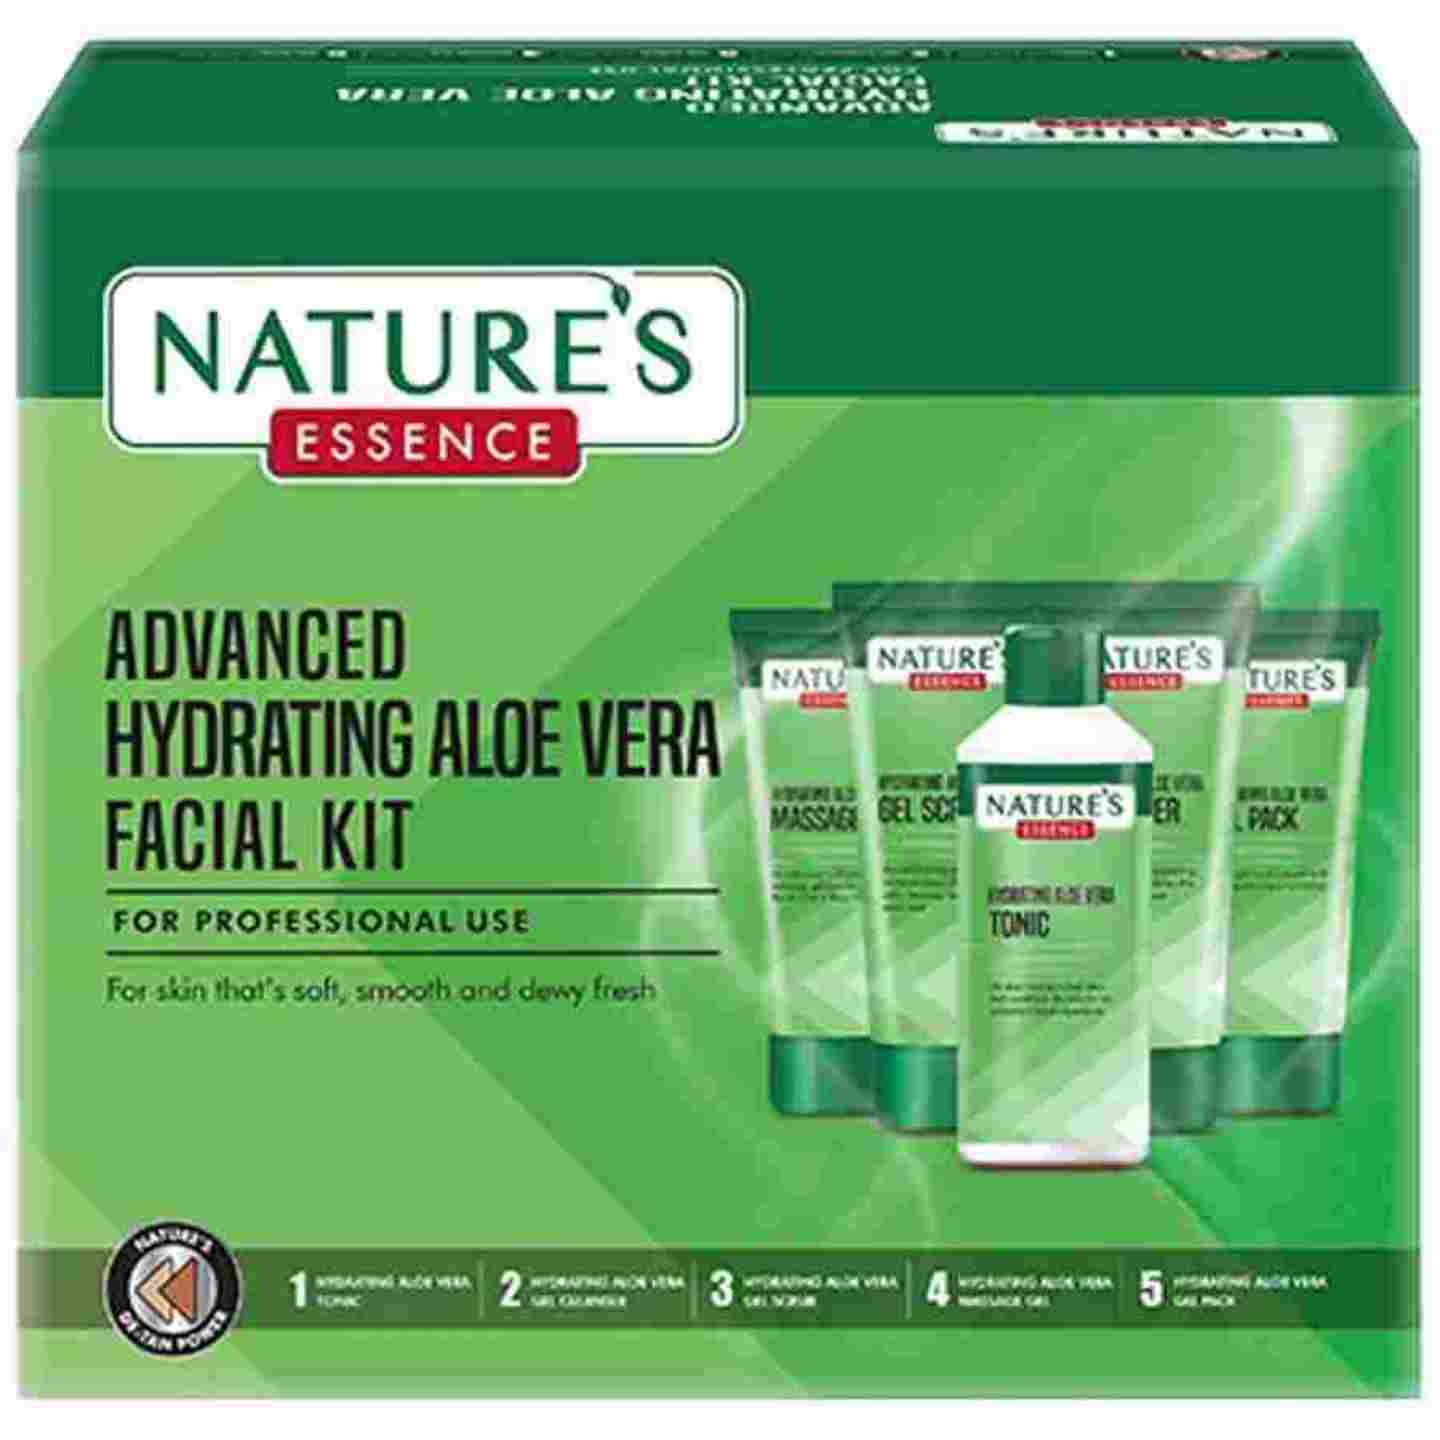 NATURES ESSENCE Hydrating Aloe Vera Facial Kit 20g-PACK of 2